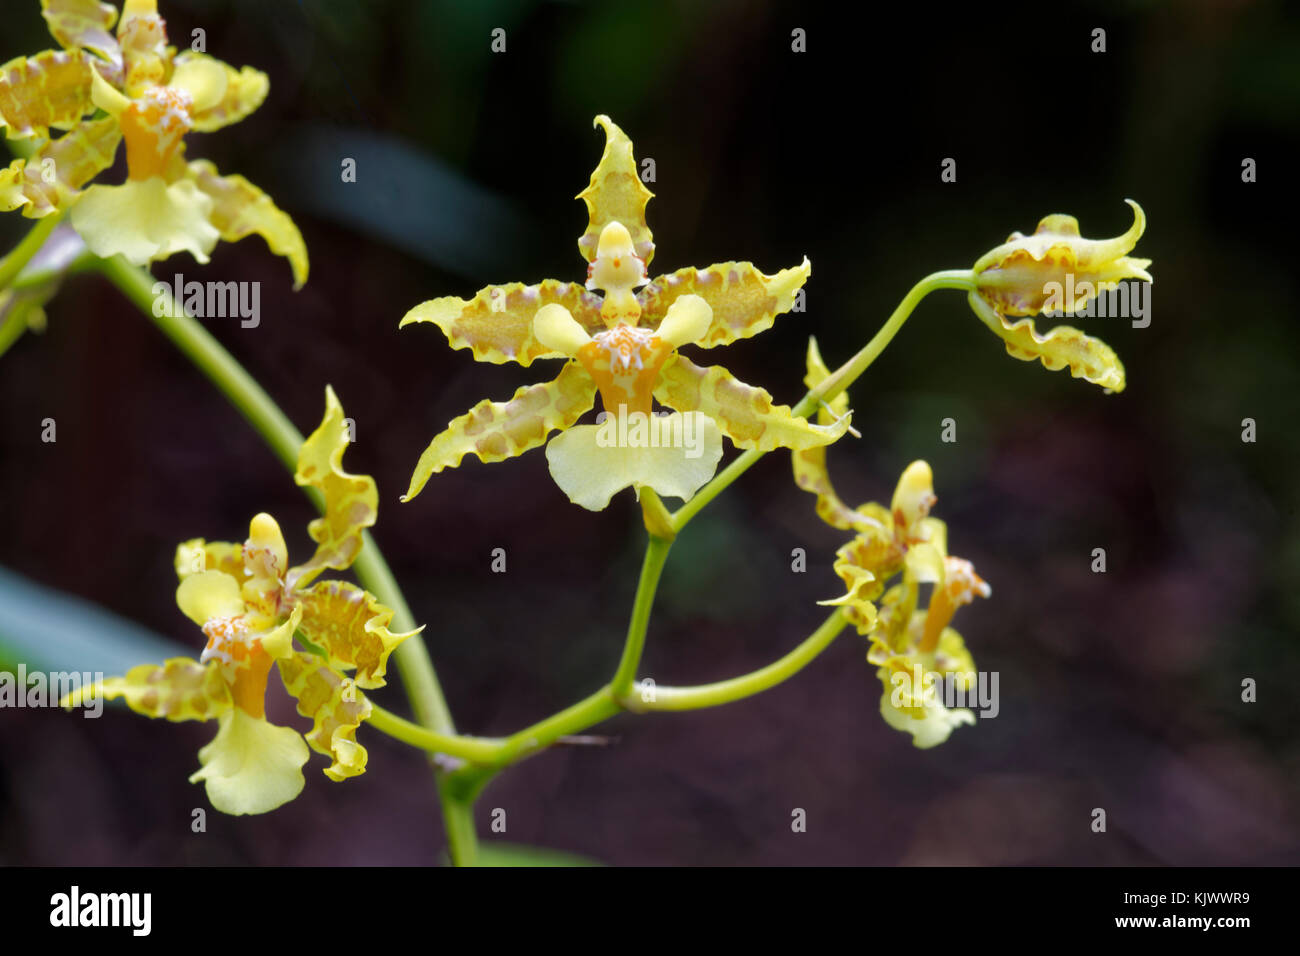 The orchid 'Oncidium lineoligerum' is occurring in the forests of Costa Rica, Panama, Columbia, Ecuador and Peru. It's living as epiphyte on trees. Stock Photo